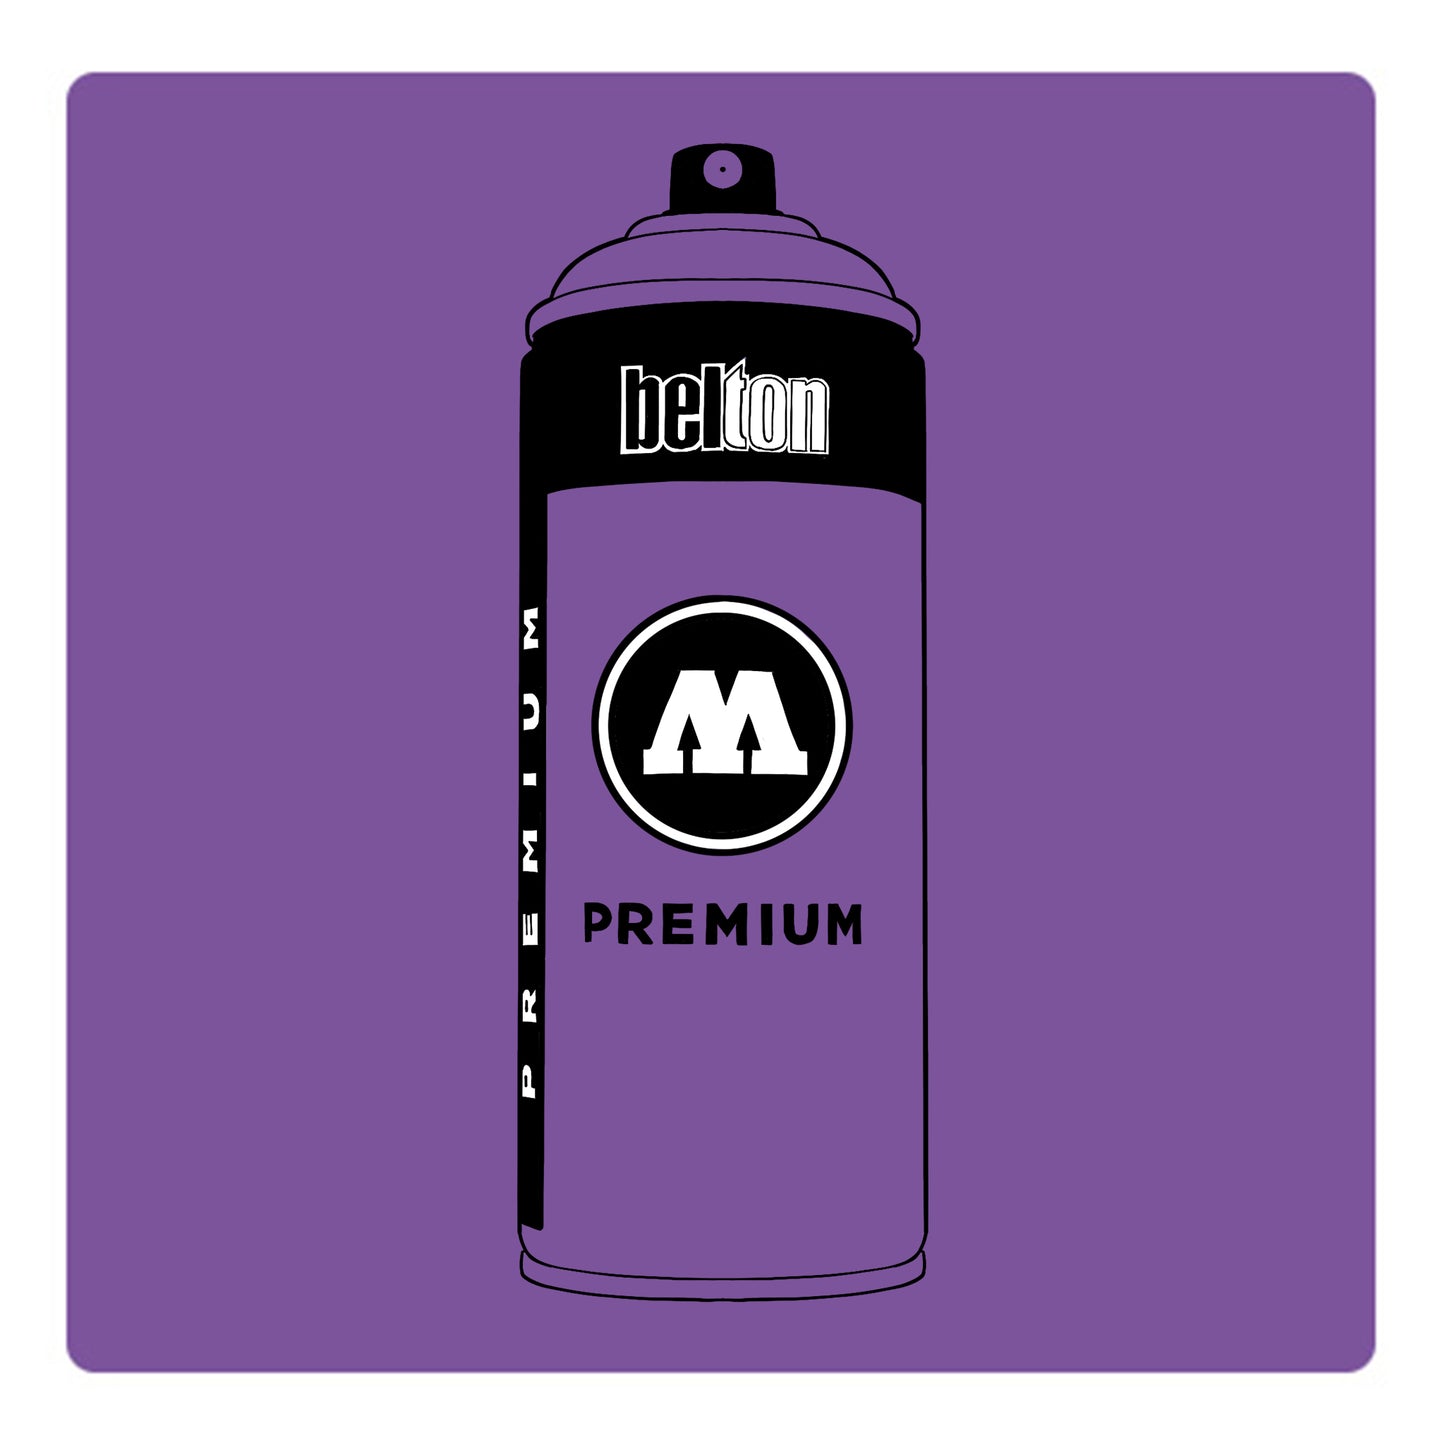 A black outline drawing of a pastel purple spray paint can with the words "belton","premium" and the letter"M" written on the face in black and white font. The background is a color swatch of the same pastel purple with a white border.